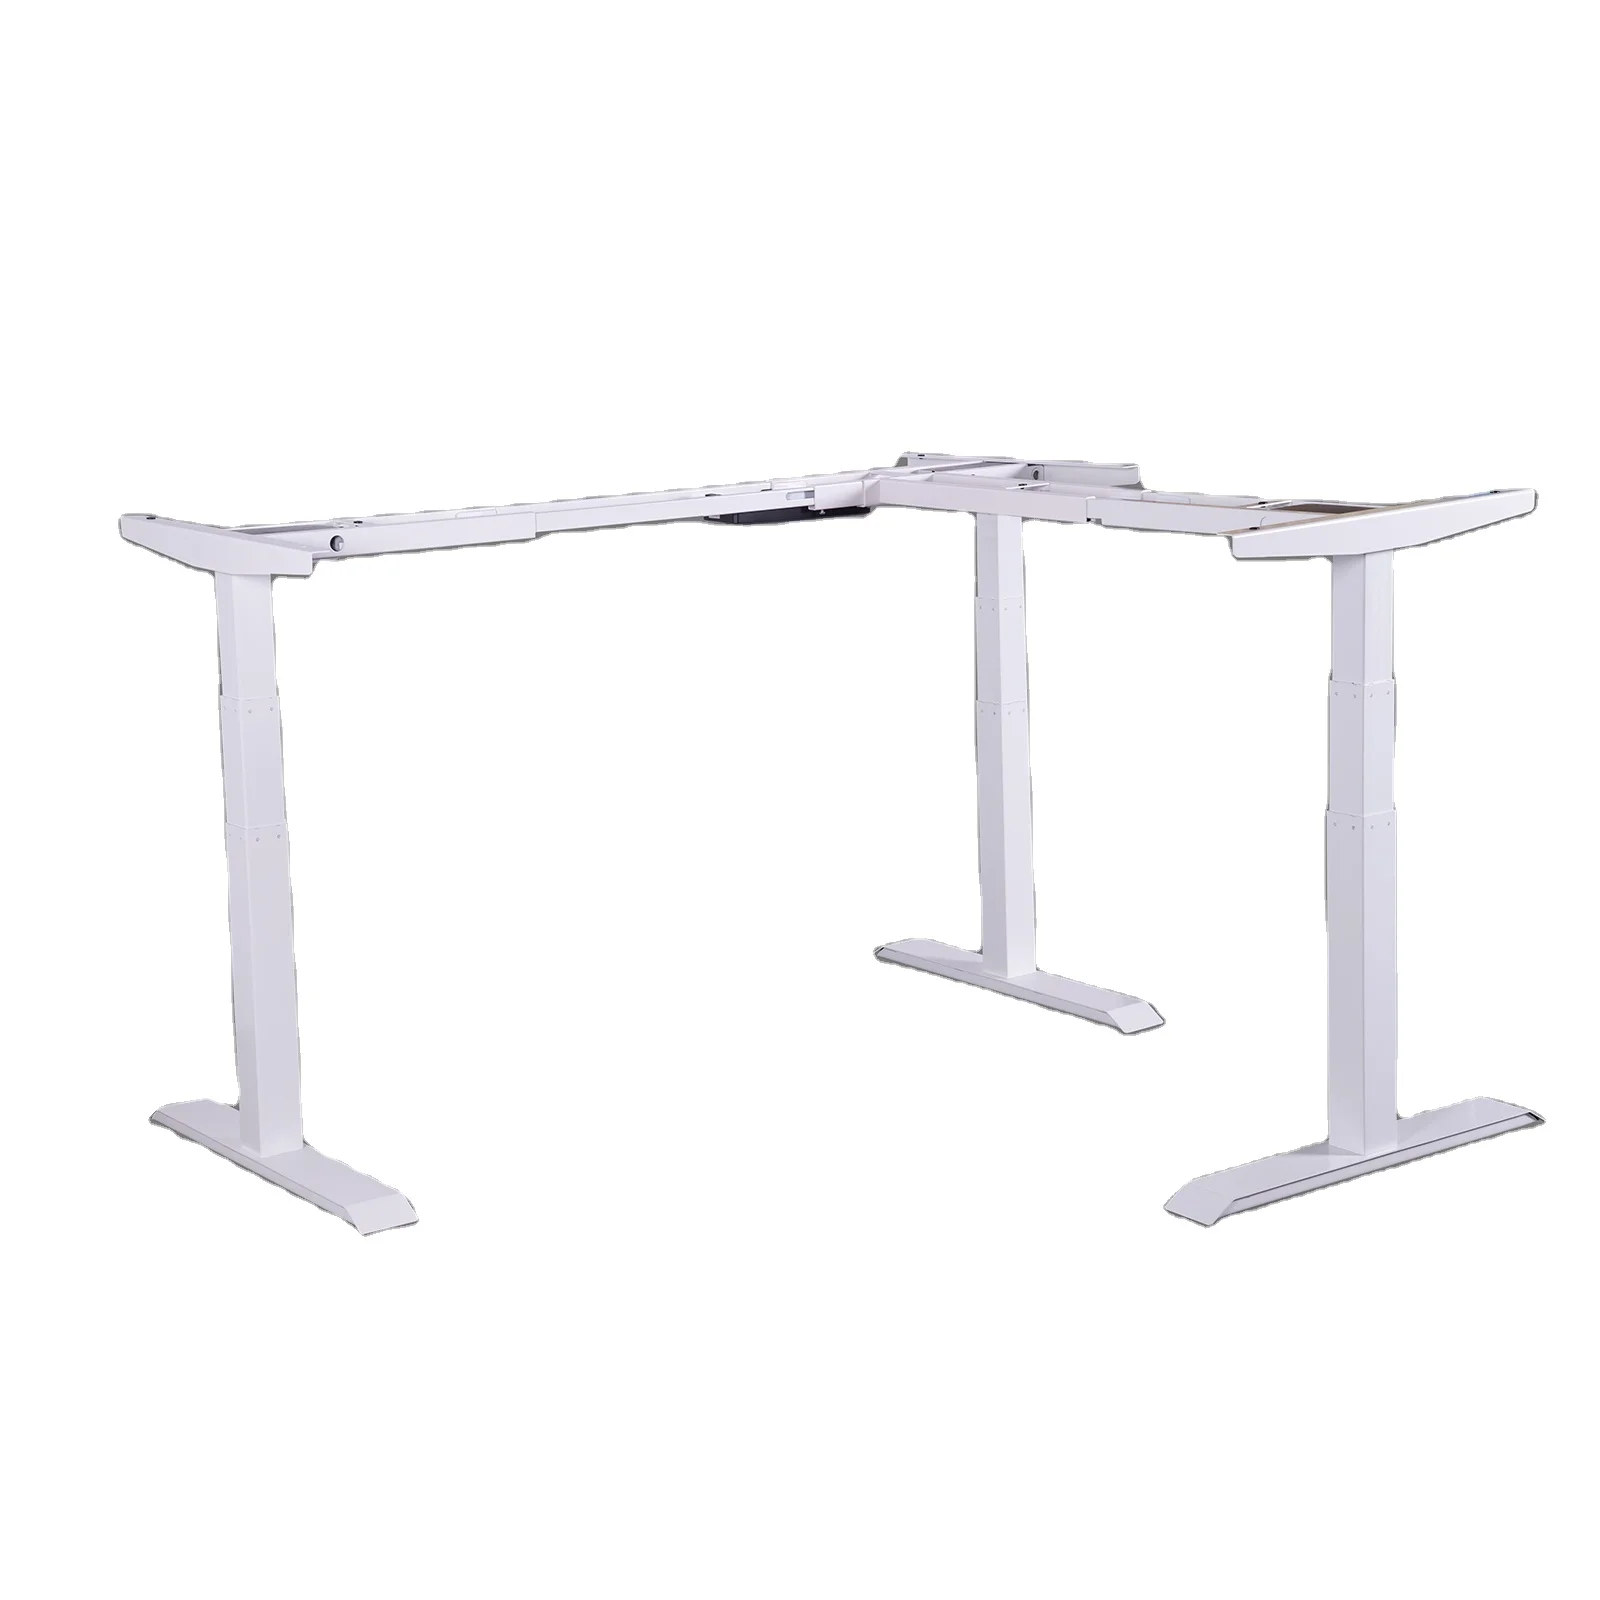 Dual motor electric height adjustable desks for home office sit/stand working,90 degree stitching angle desk